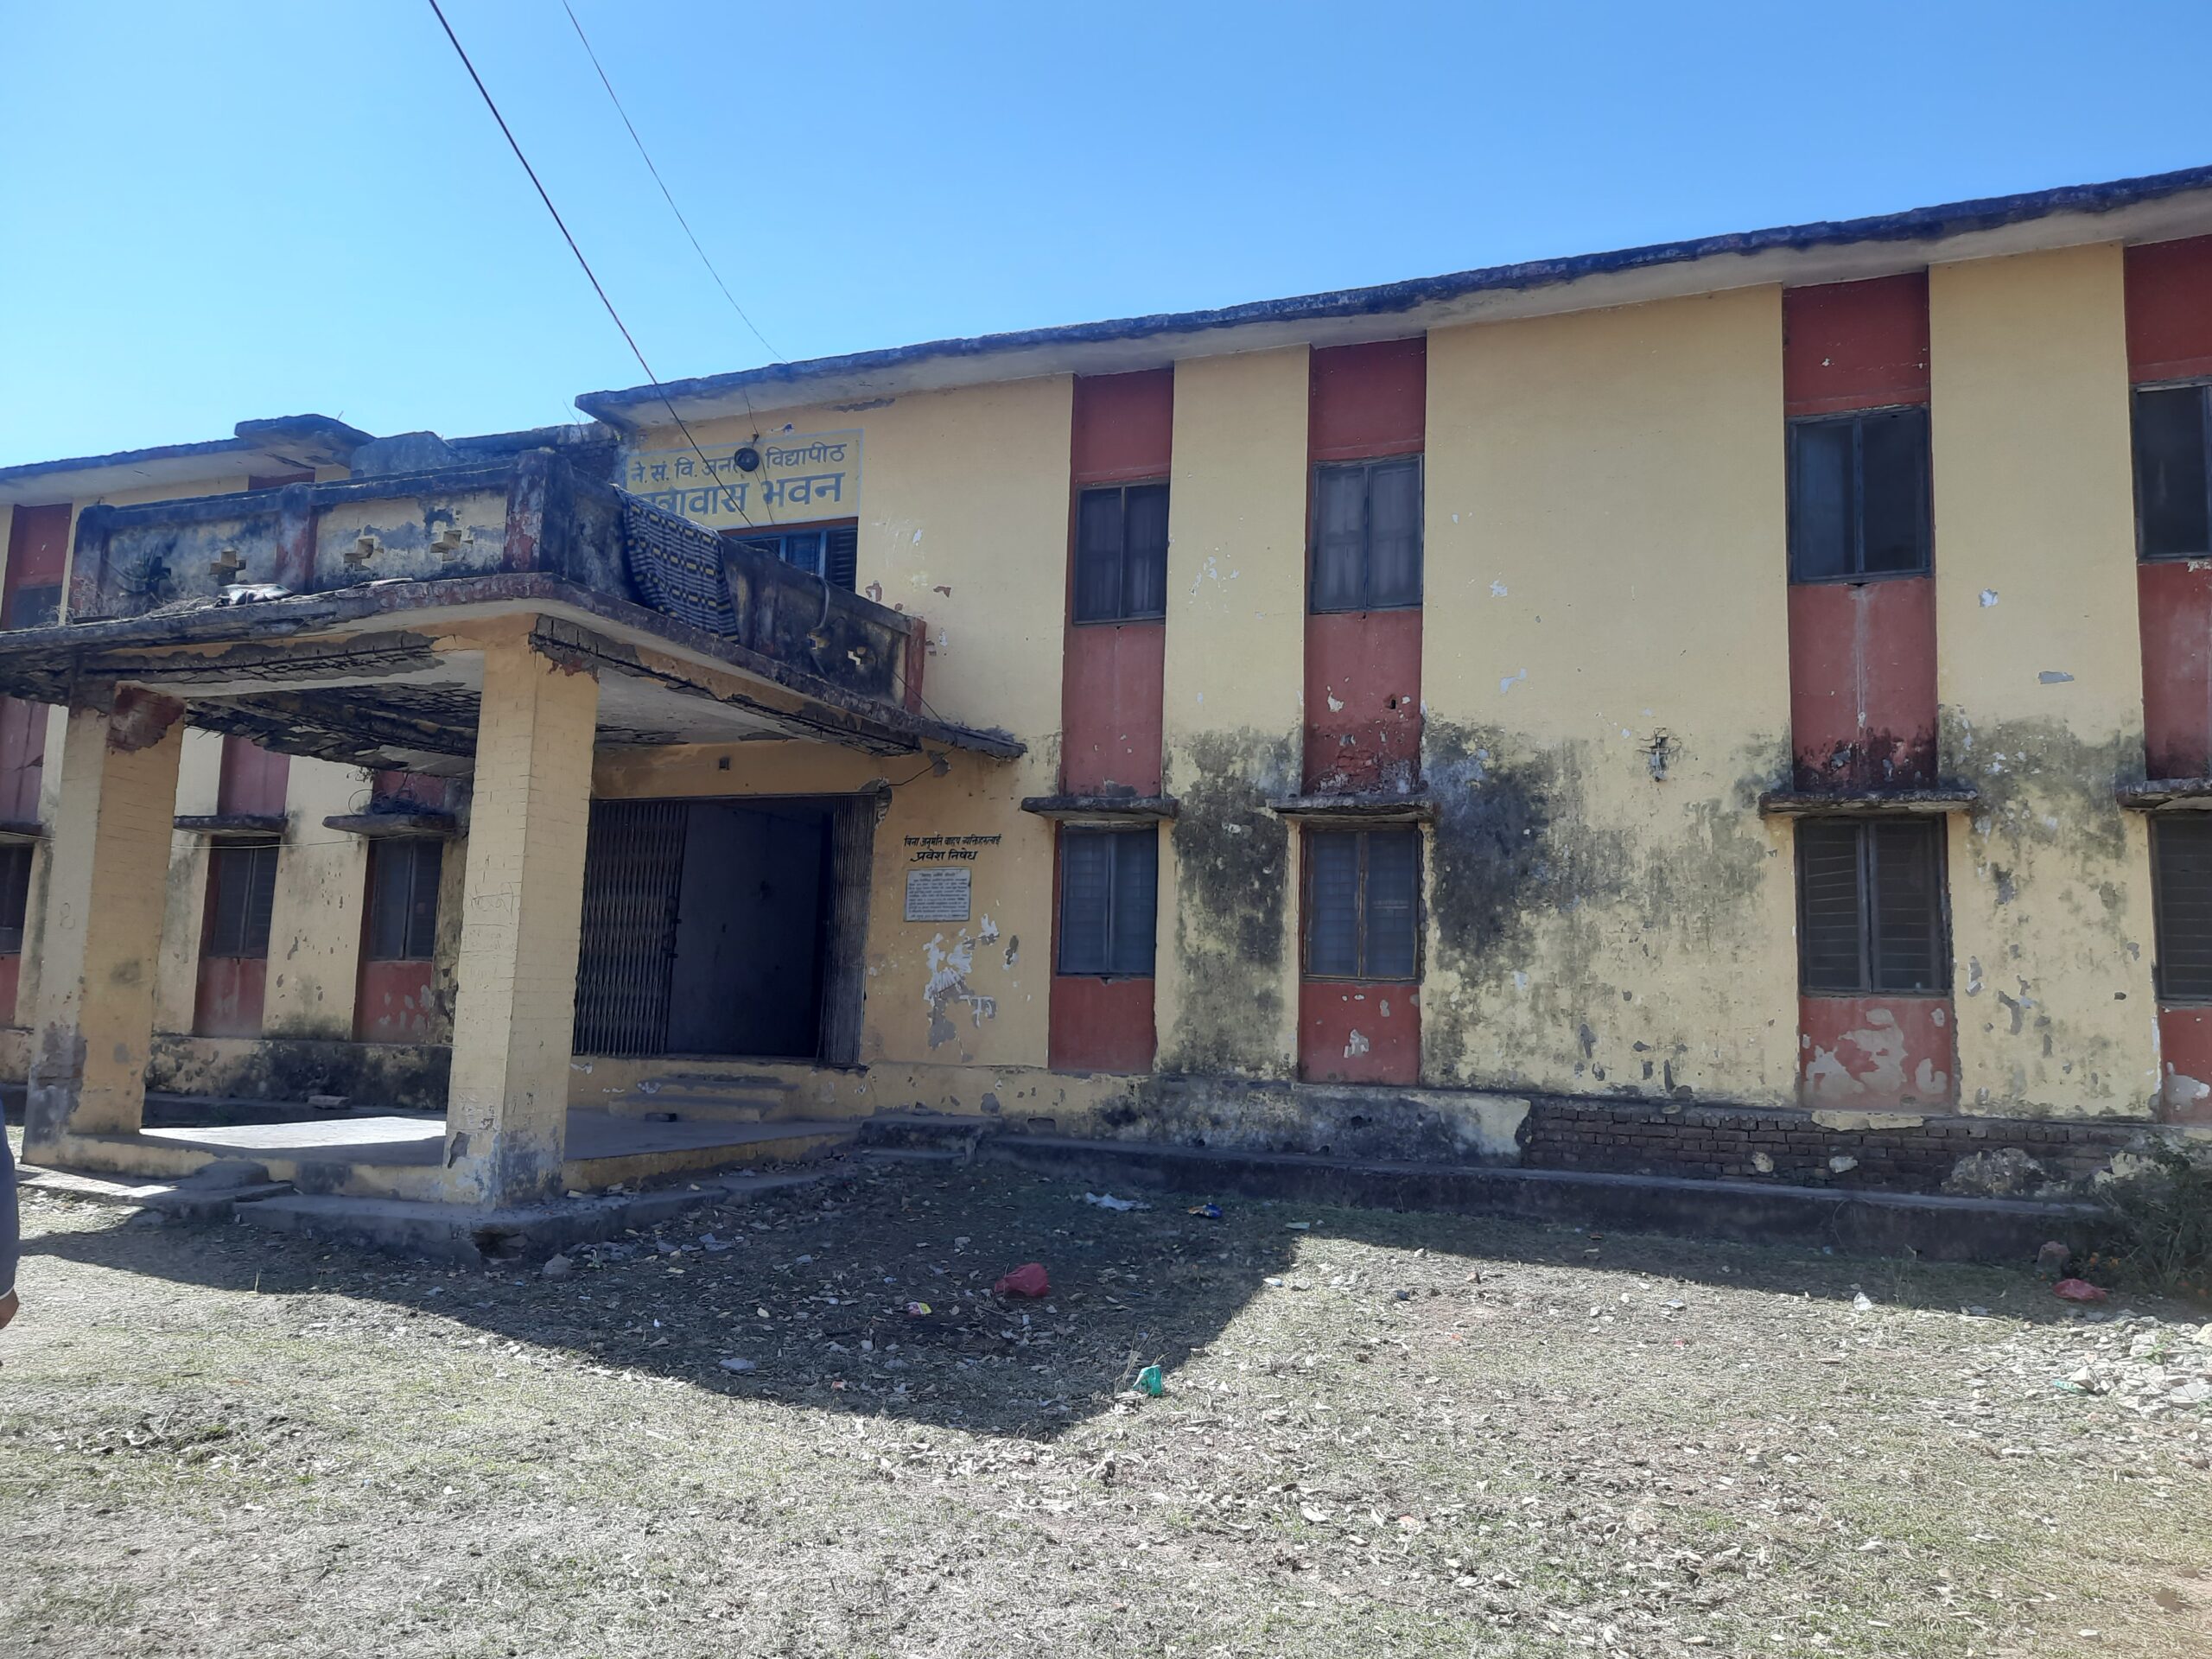 Students reside in dilapidated hostel building